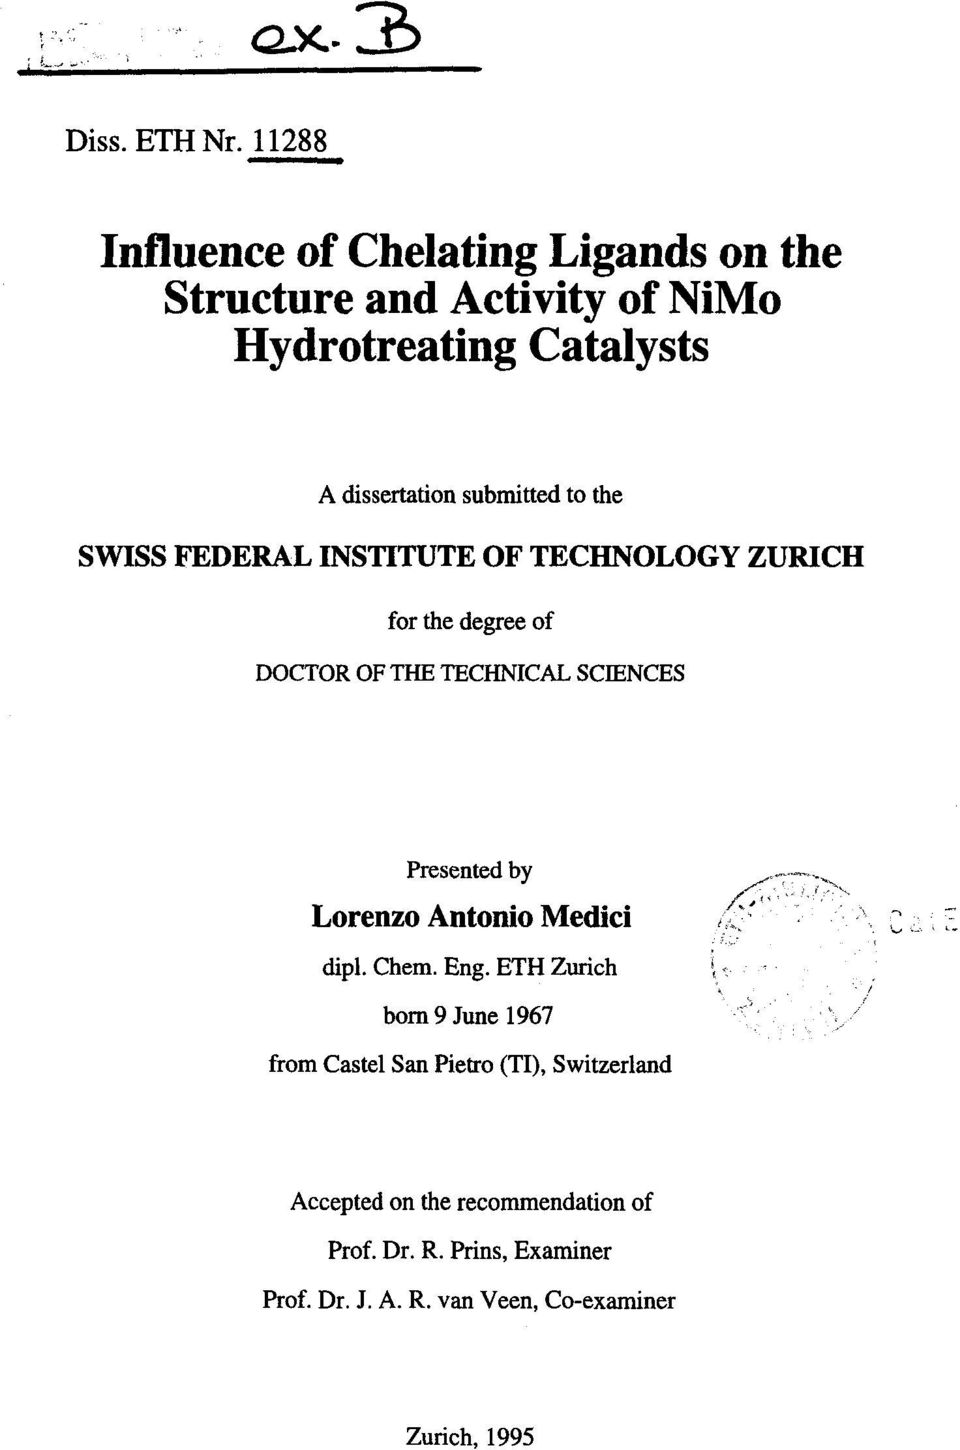 submitted to the SWISS FEDERAL INSTITUTE OF TECHNOLOGY ZURICH for the degree of DOCTOR OF THE TECHNICAL SCIENCES